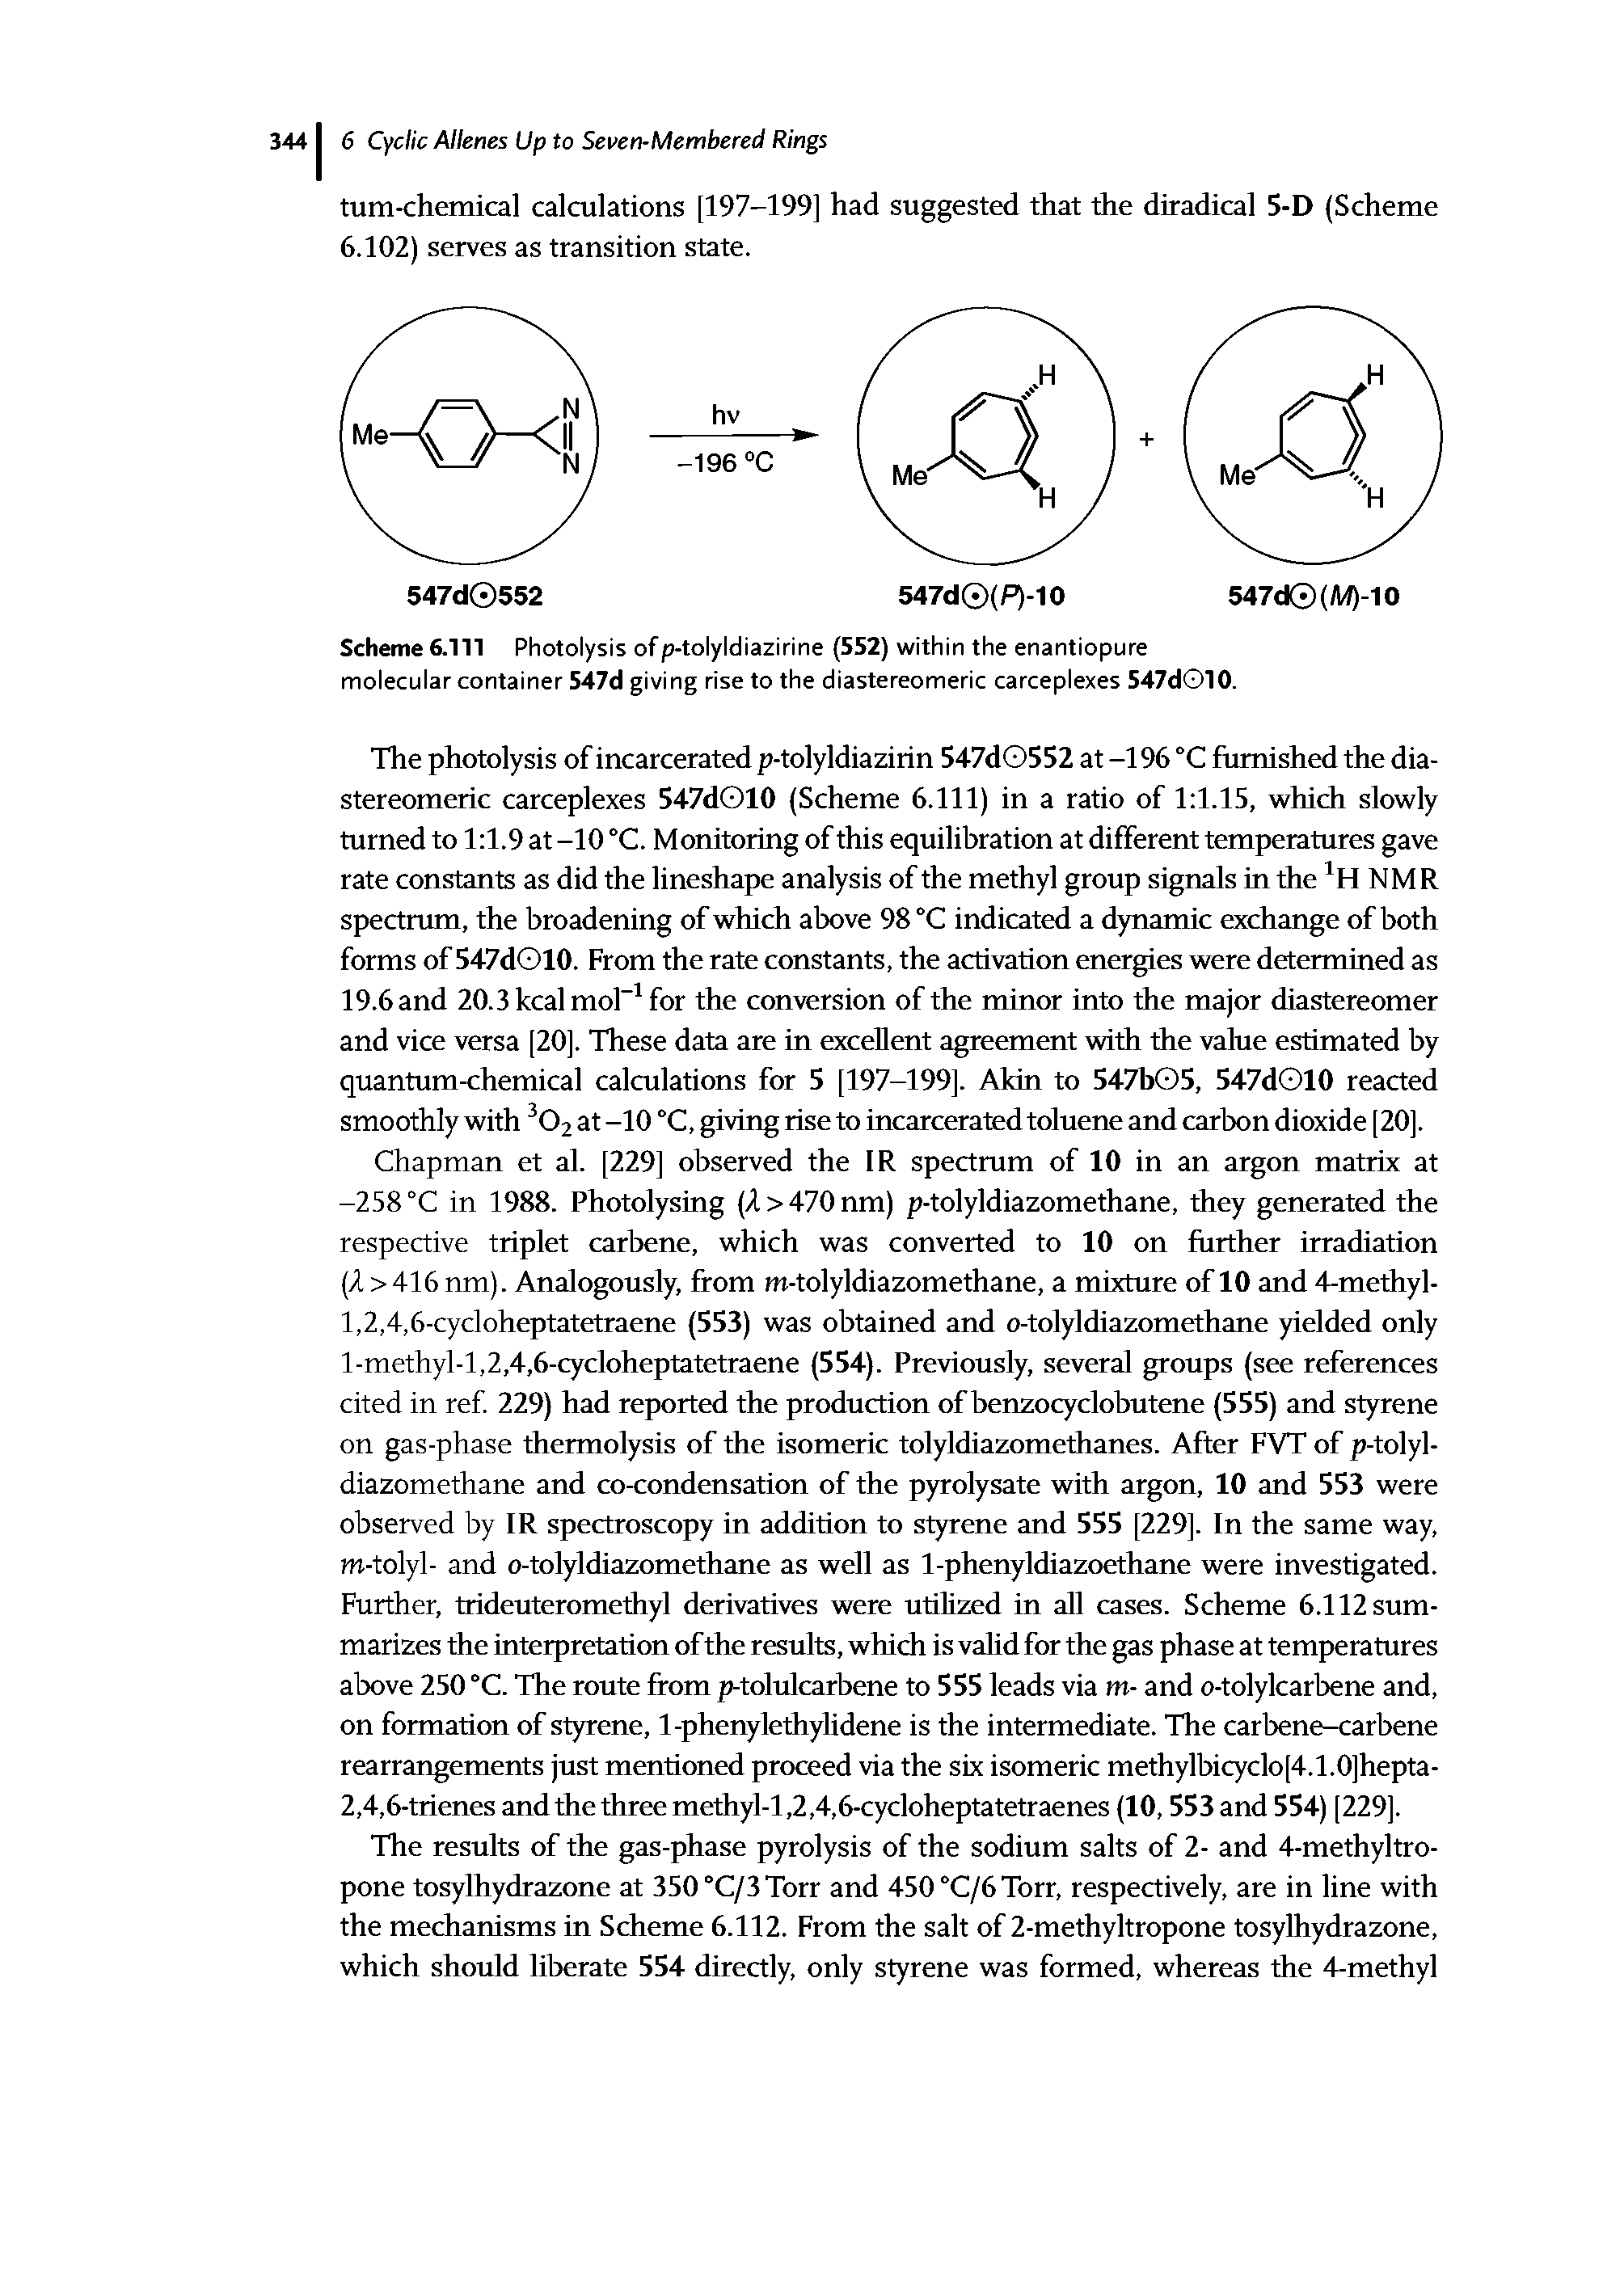 Scheme 6.111 Photolysis ofp-tolyldiazirine (552) within the enantiopure molecular container 547d giving rise to the diastereomeric carceplexes 547dO10.